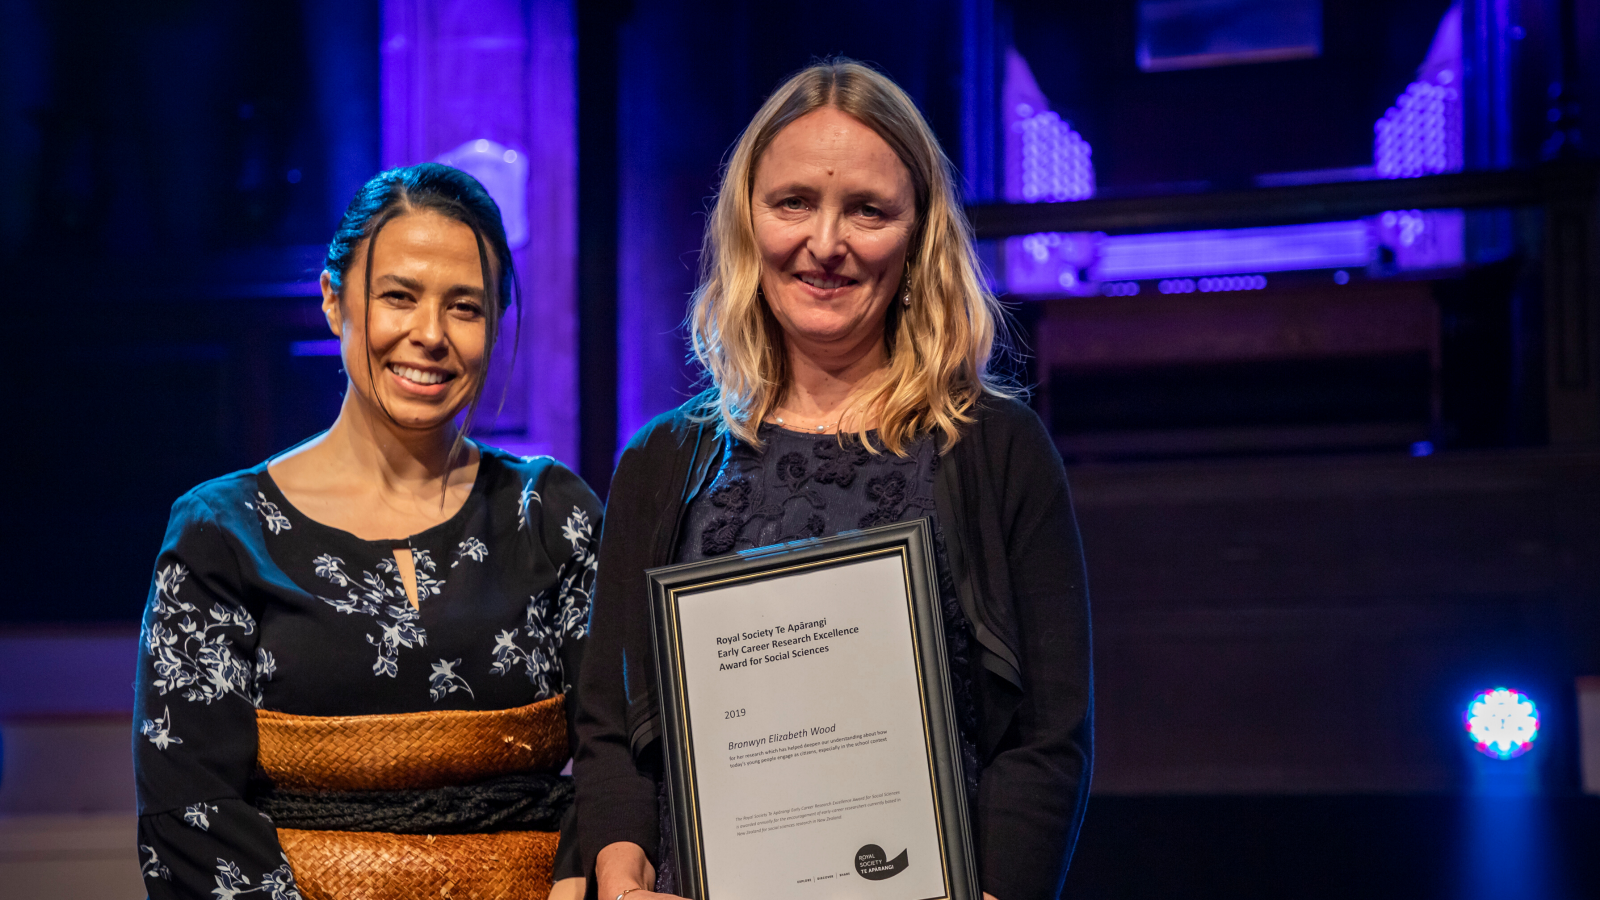 Dr Dianne Sika-Paotonu and Dr Bronwyn Wood stand on a stage holding an award.